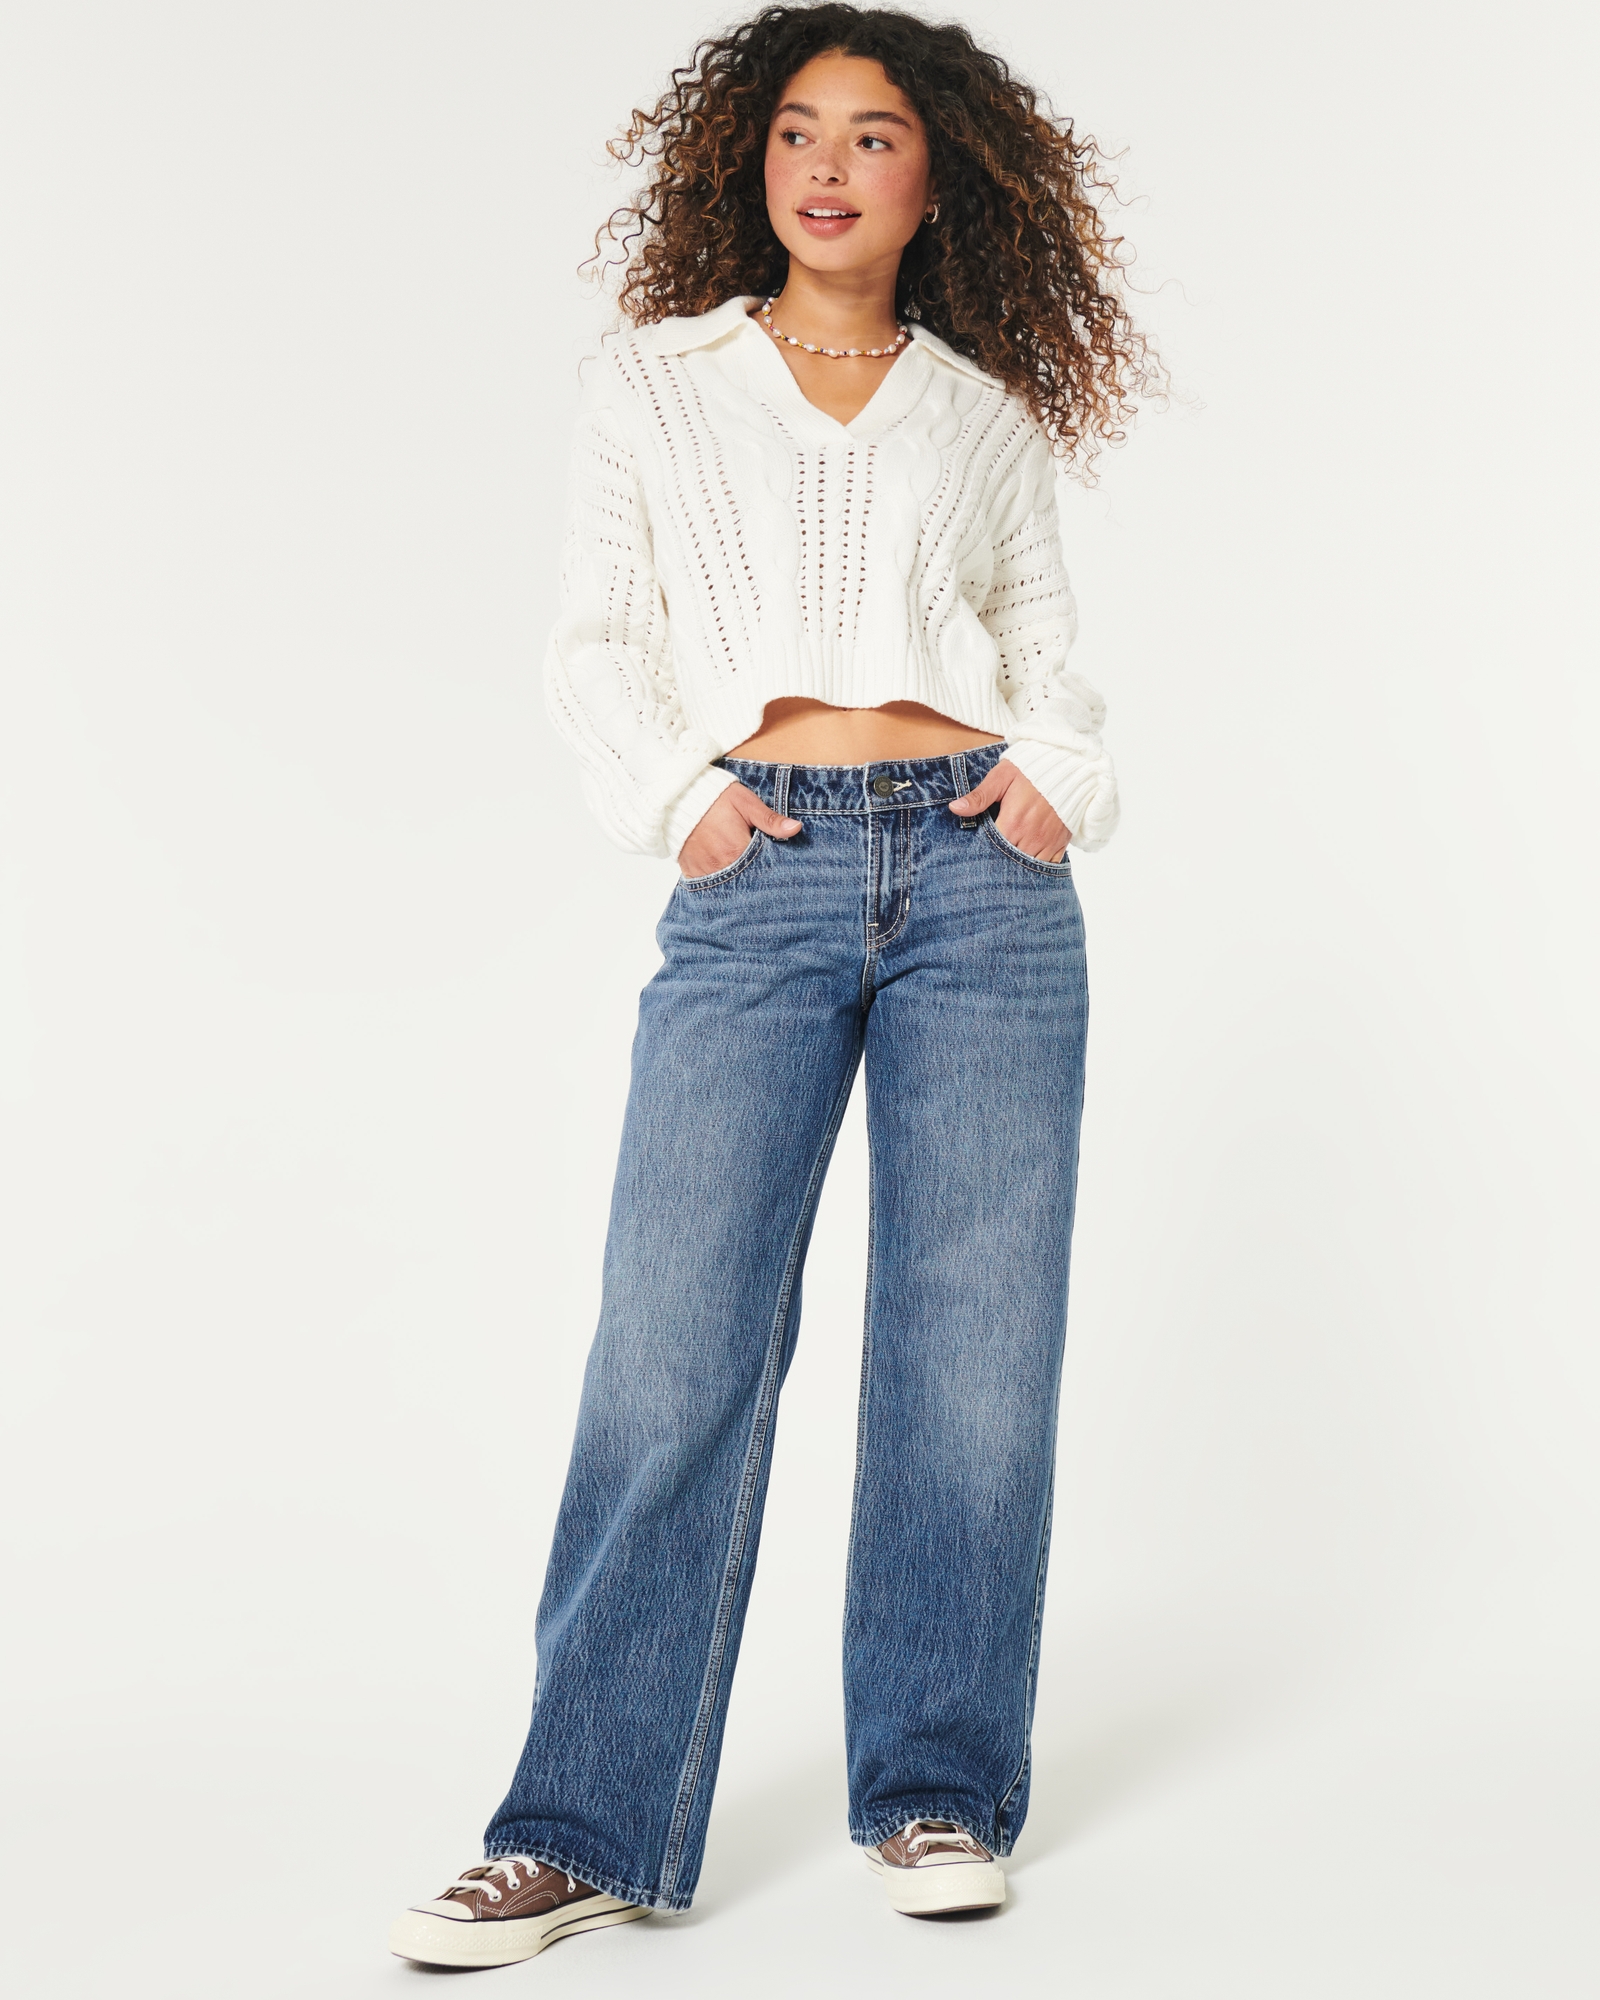 https://img.hollisterco.com/is/image/anf/KIC_355-4235-0098-276_model1.jpg?policy=product-extra-large